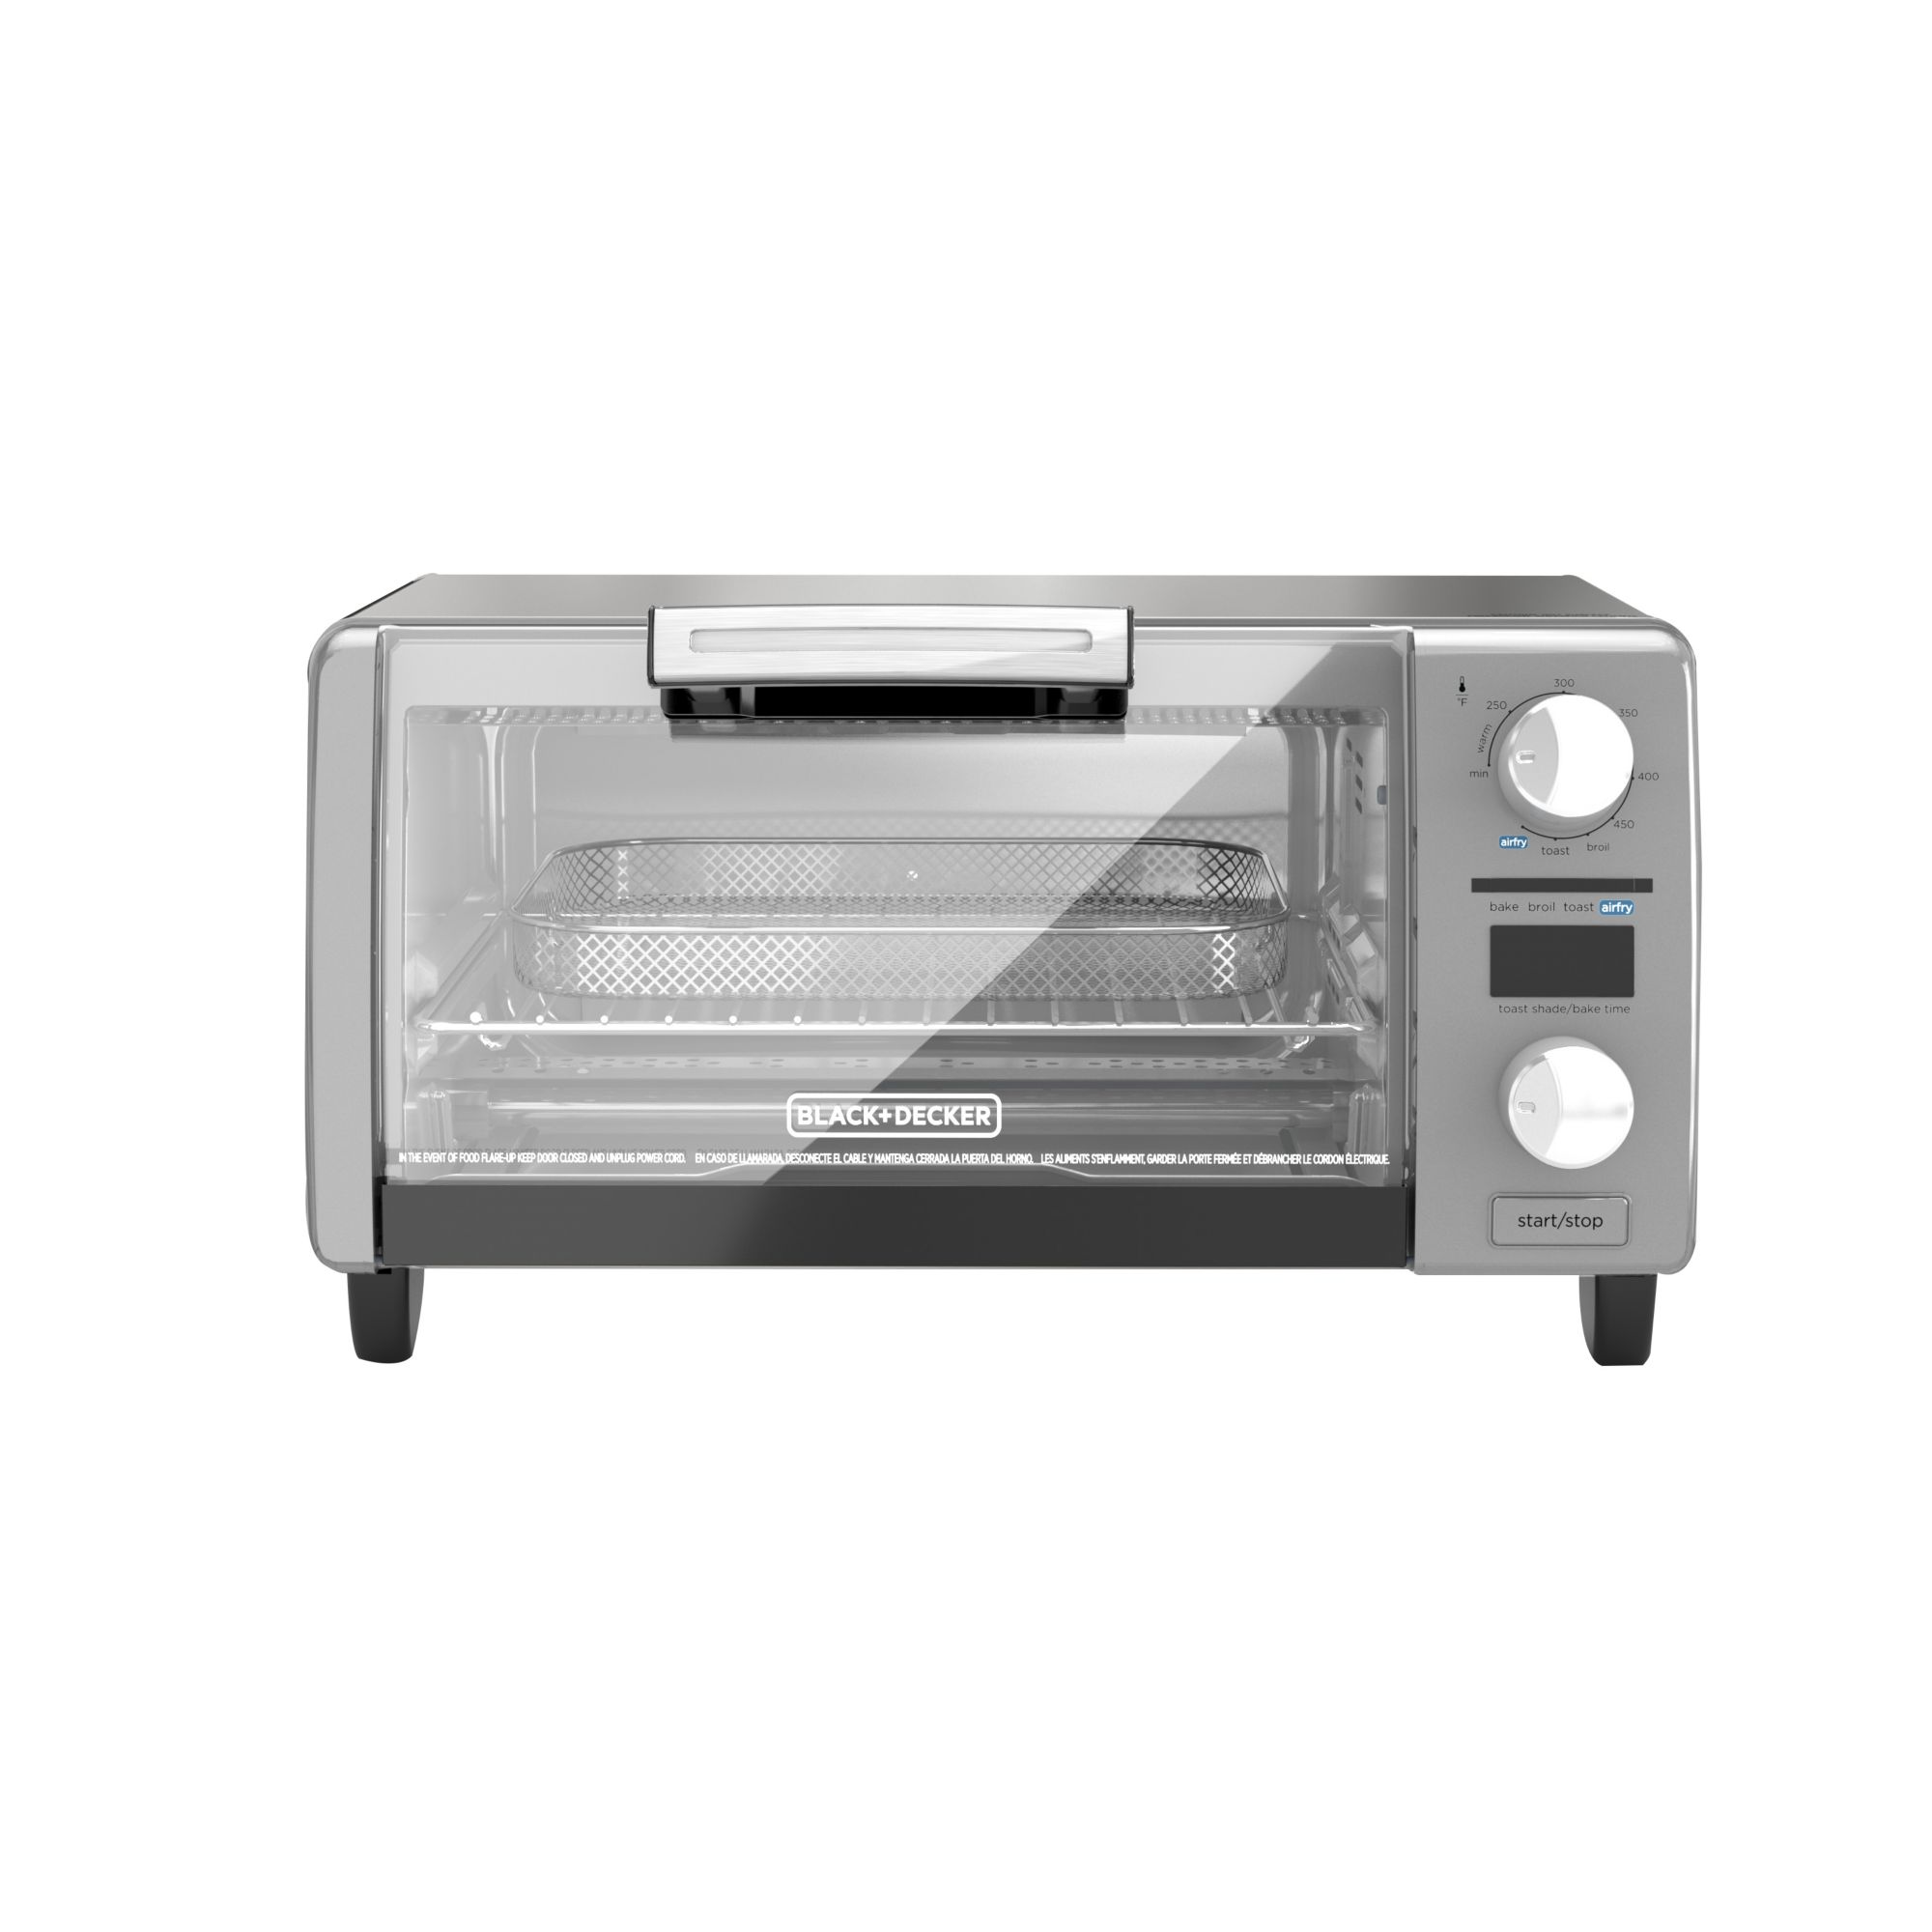 Black & Decker Air Fry Toaster Oven - household items - by owner -  housewares sale - craigslist